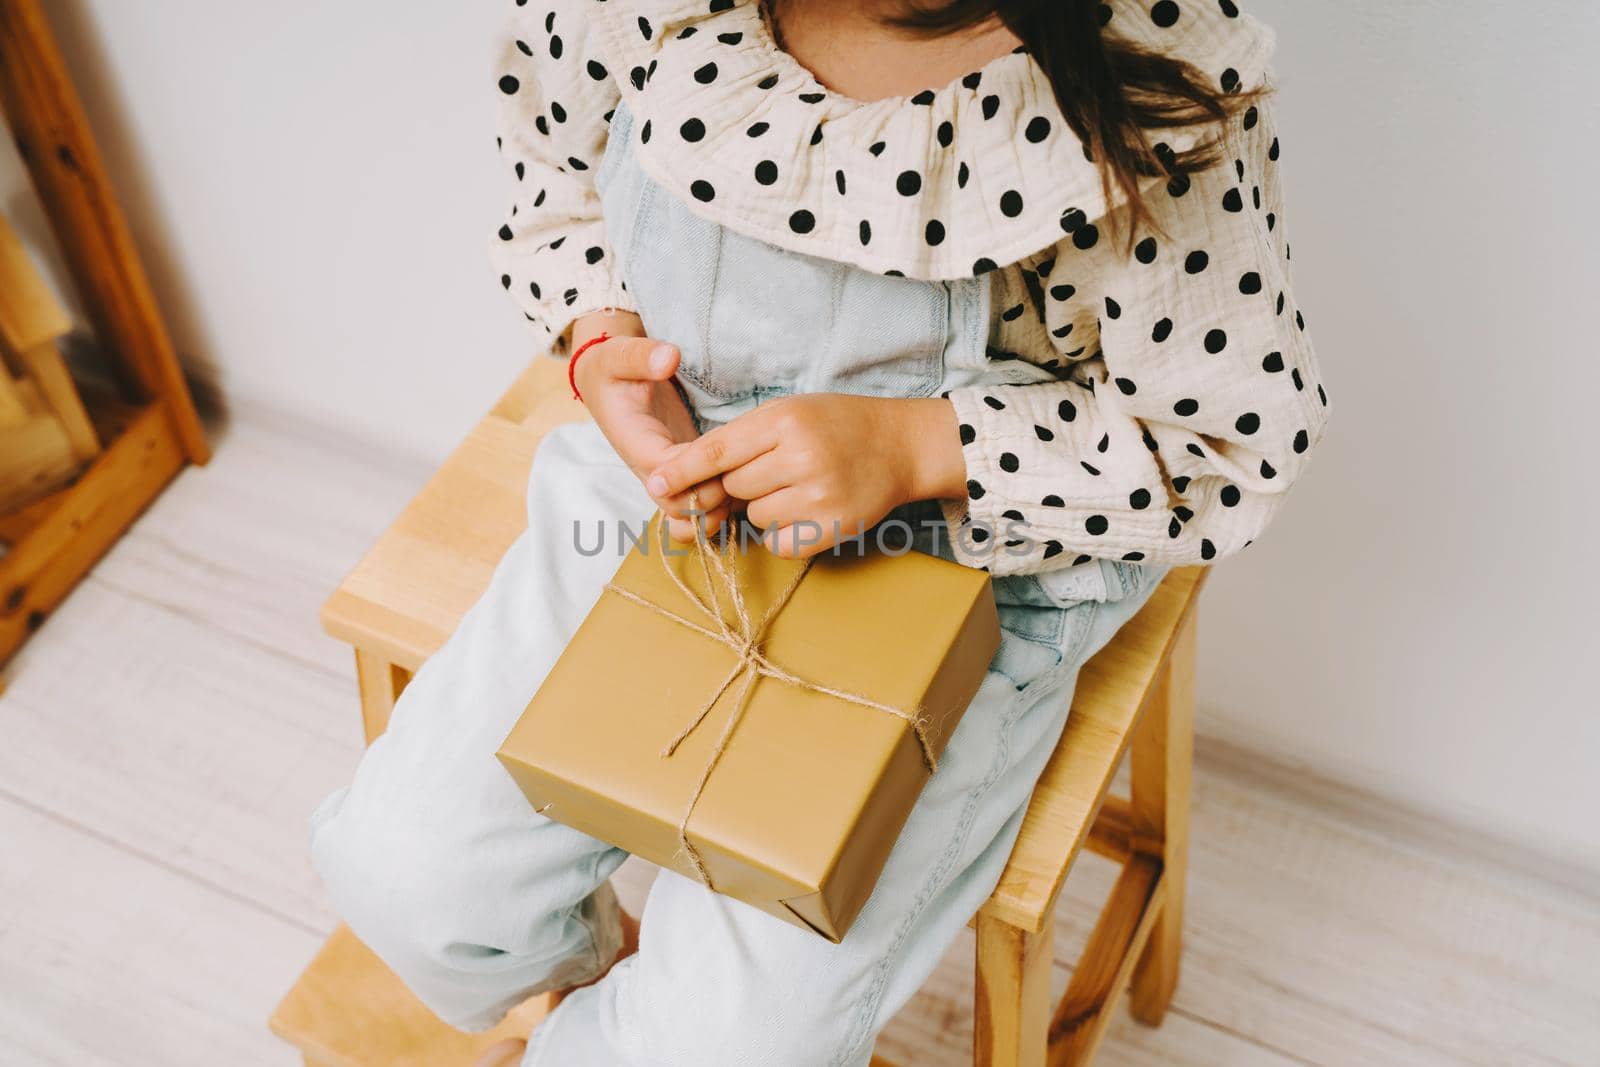 A little girl in a denim jumpsuit sits on a wooden chair and holds a gift box on her knees.